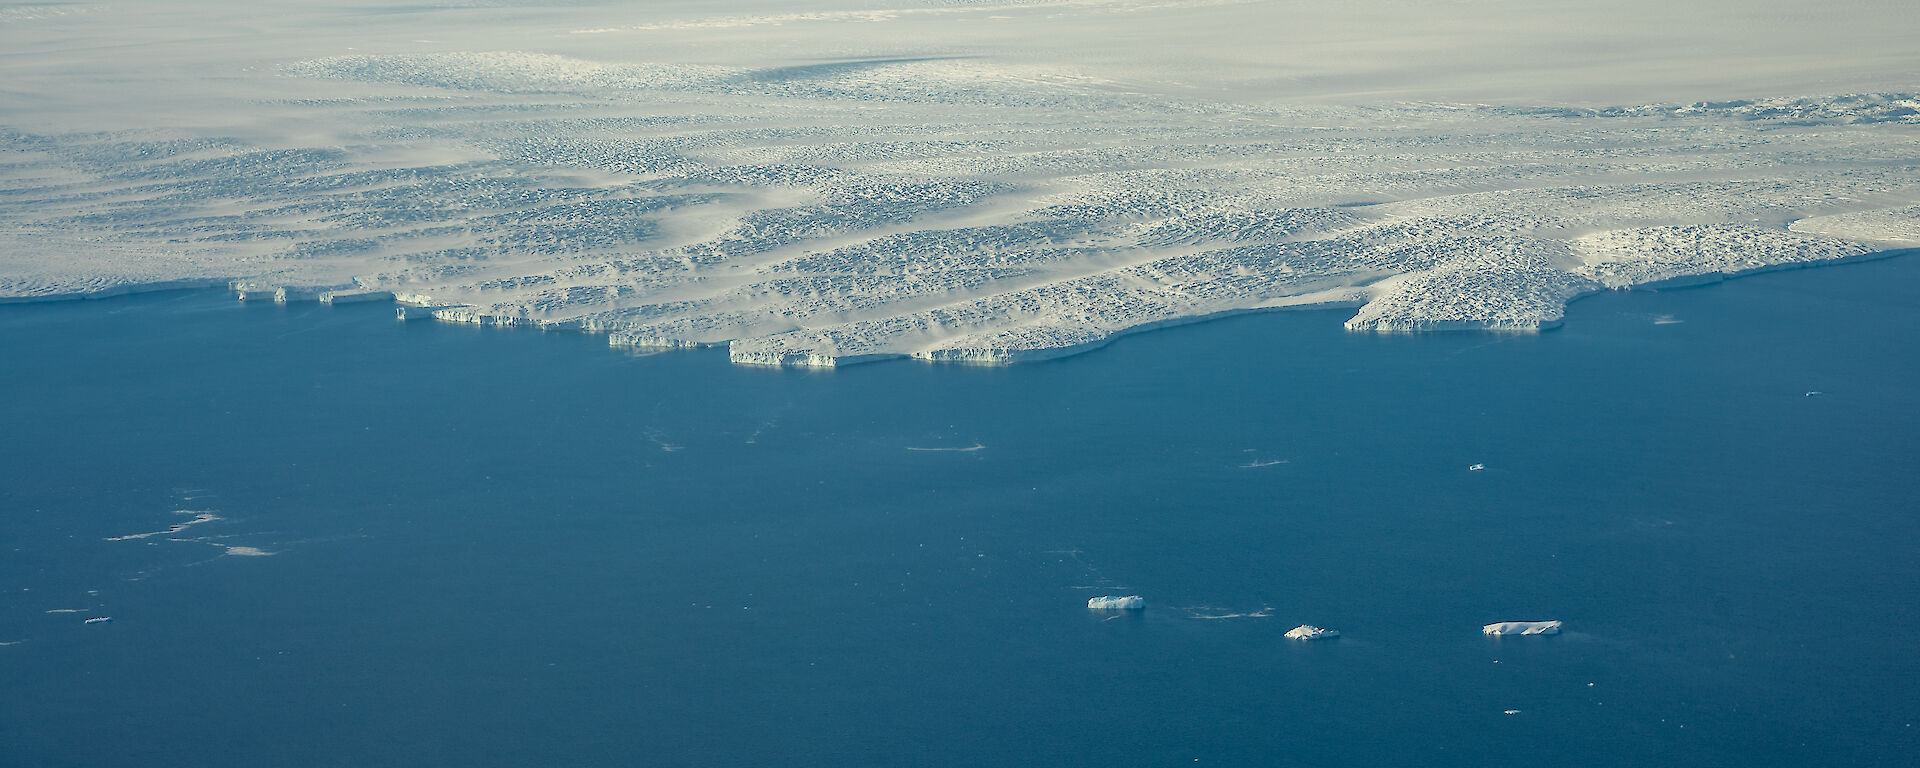 An aerial view of the edge of a glacier where it meets the ocean. The glacier looks like a great, white coastline, with low, dune-like wave formations and rugged, rock-like texture.